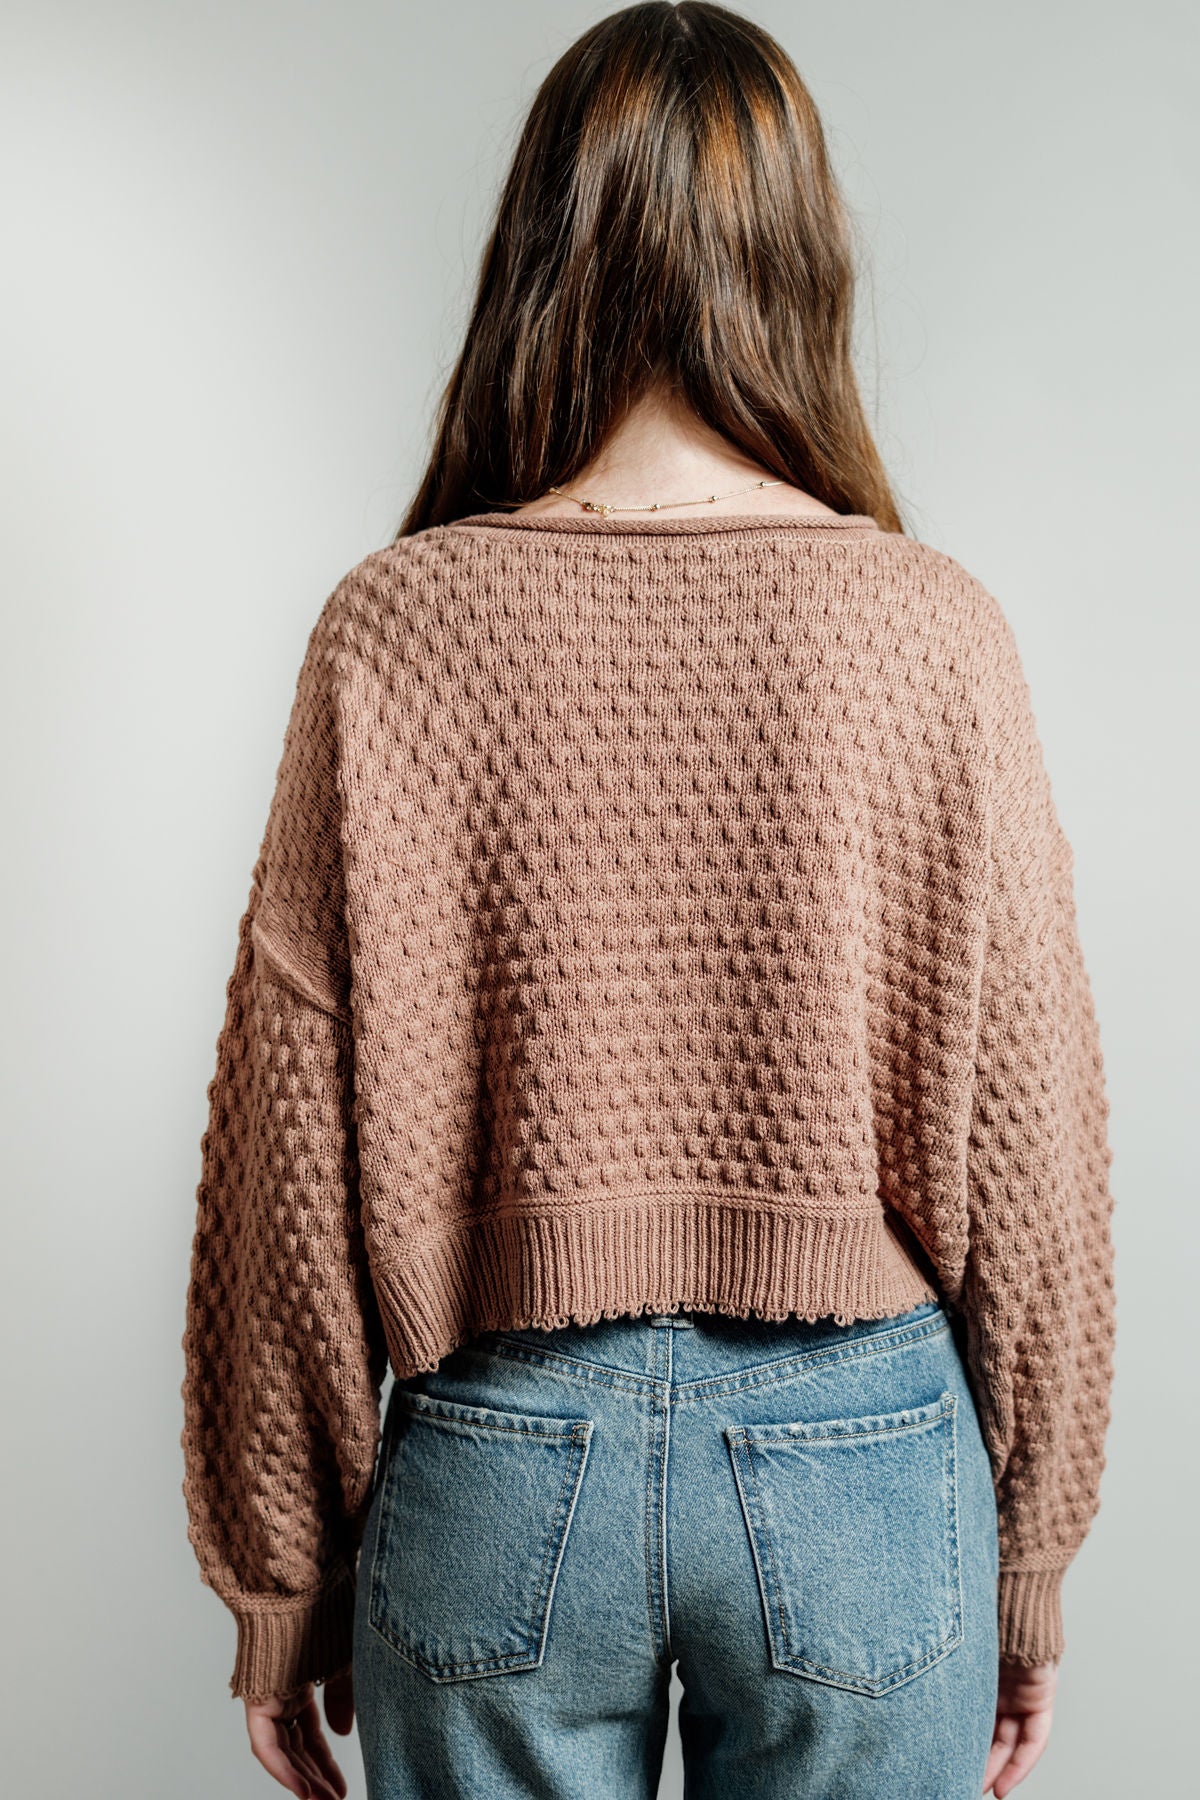 Pictured is a deep blush, knit sweater with a scoop neckline, cropped body, and cuffed knit sleeves.